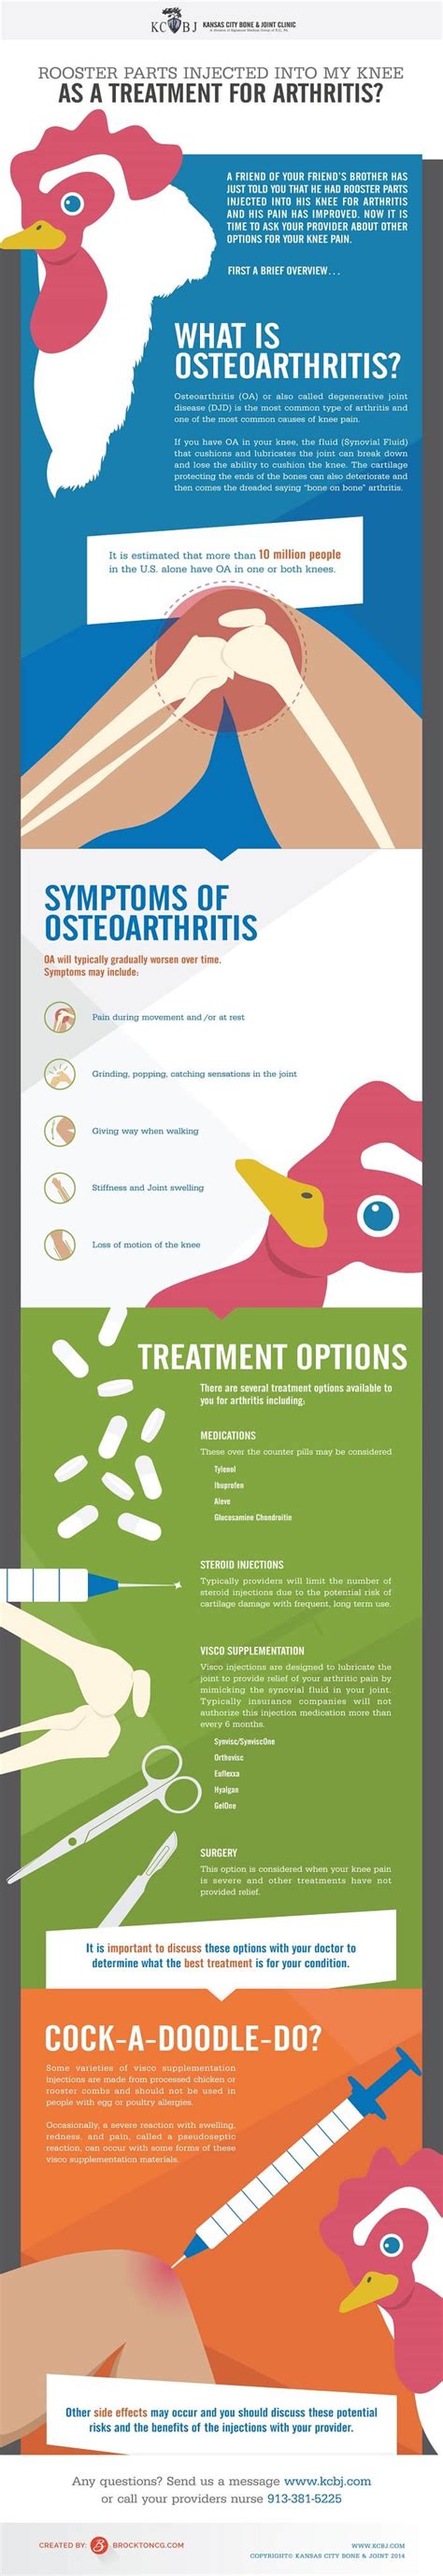 blog rooster injections for knee arthritis infographic overland park ks